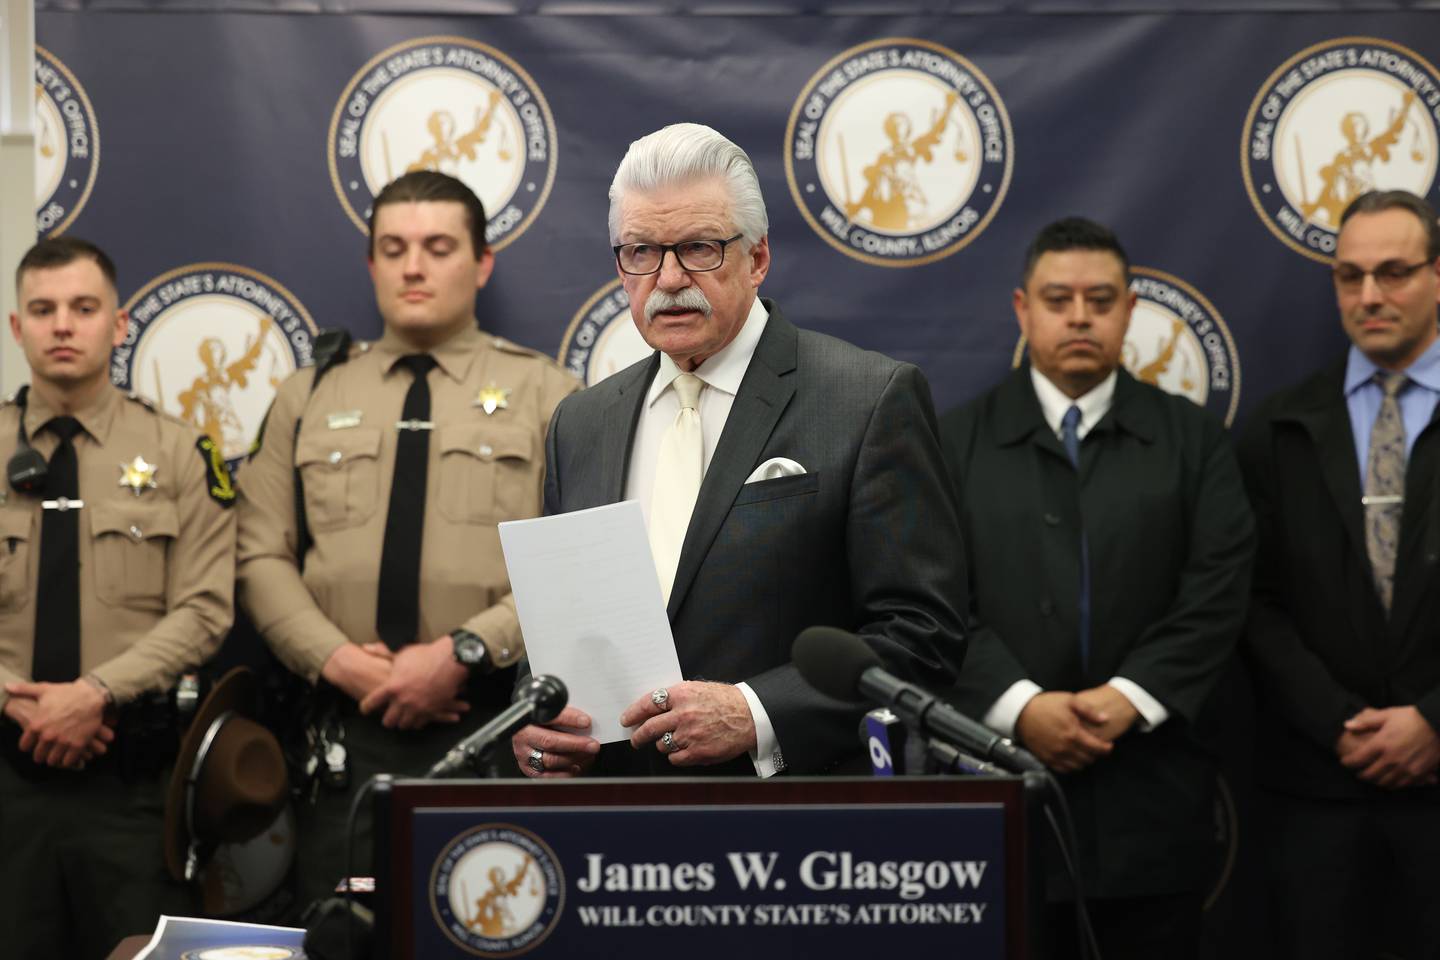 Will County State’s Attorney James Glasgow holds a press conference on Wednesday for the announcement of Jordan Henry’s 22-year prison sentence after Henry was convicted of aggravated vehicular hijacking, armed robbery, fleeing and other offenses.